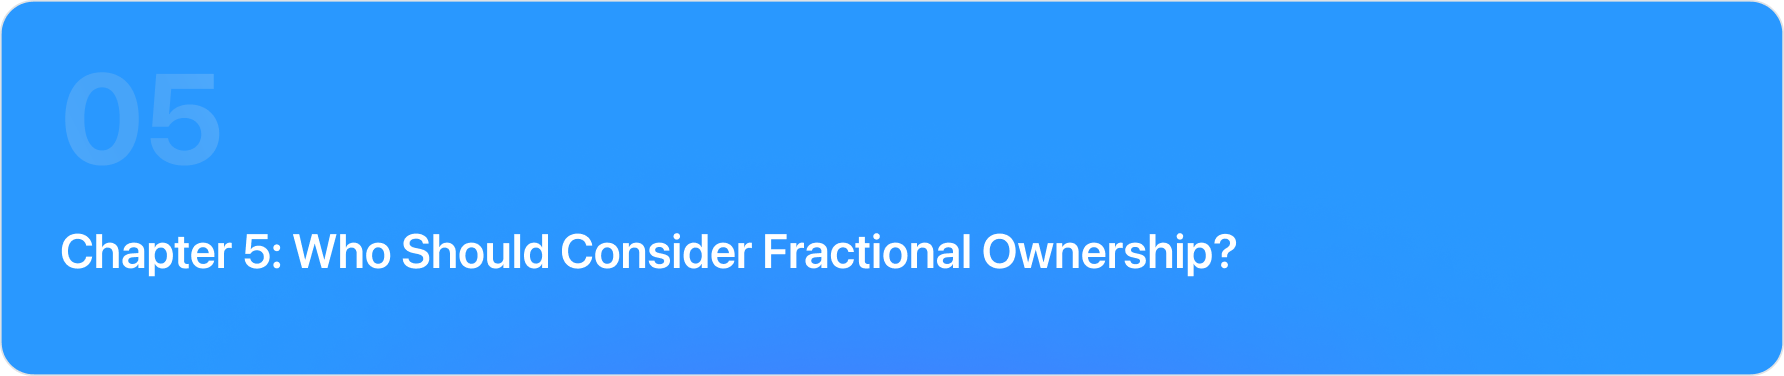 Shared Success: The Comprehensive Guide to Fractional Real Estate Ownership